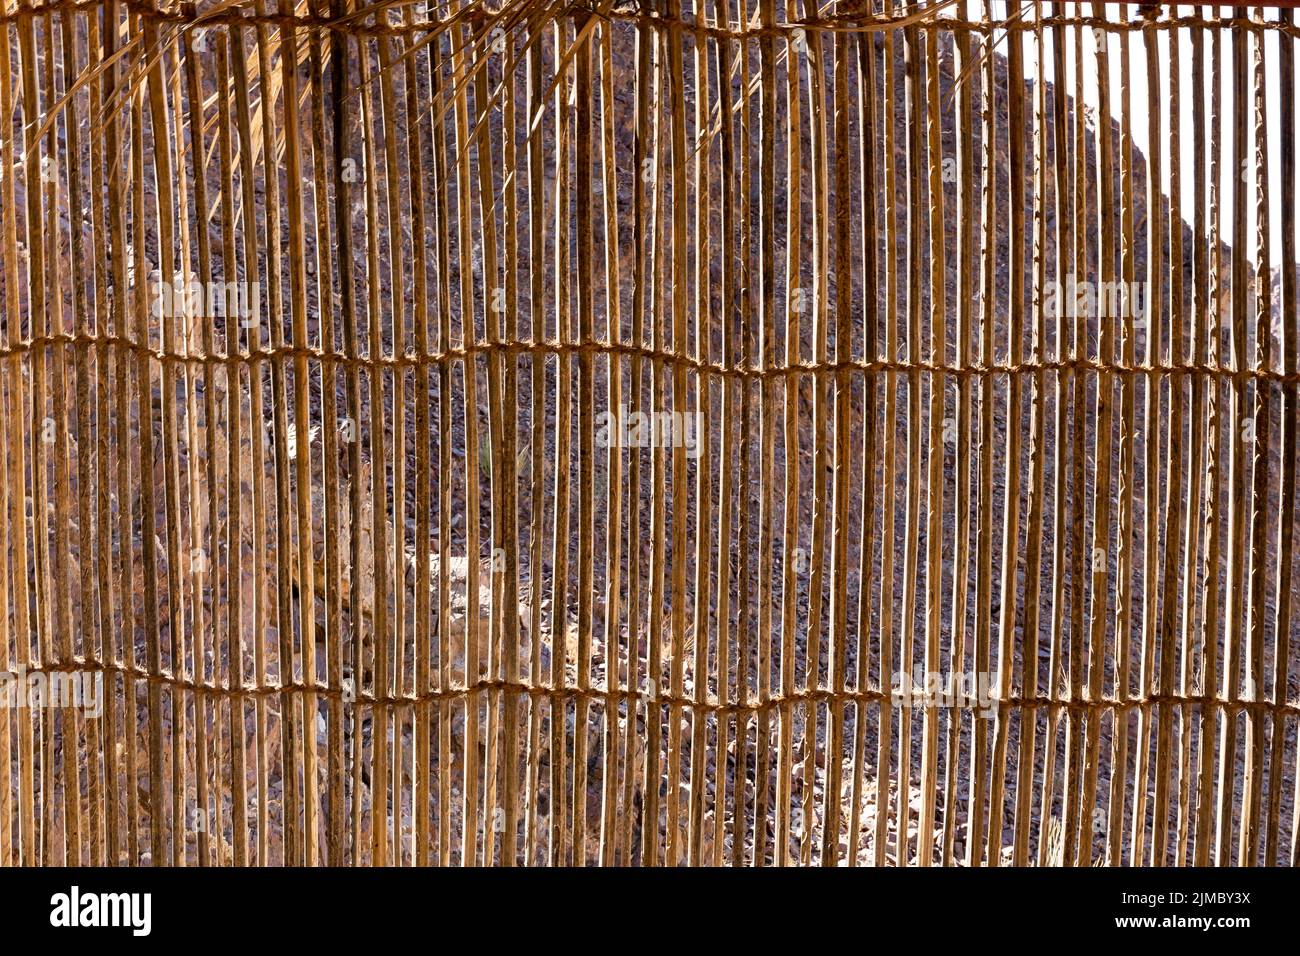 Wall made of cane and palm tree branches, natural mountain shelter in Wadi Shawka, United Arab Emirates. Stock Photo